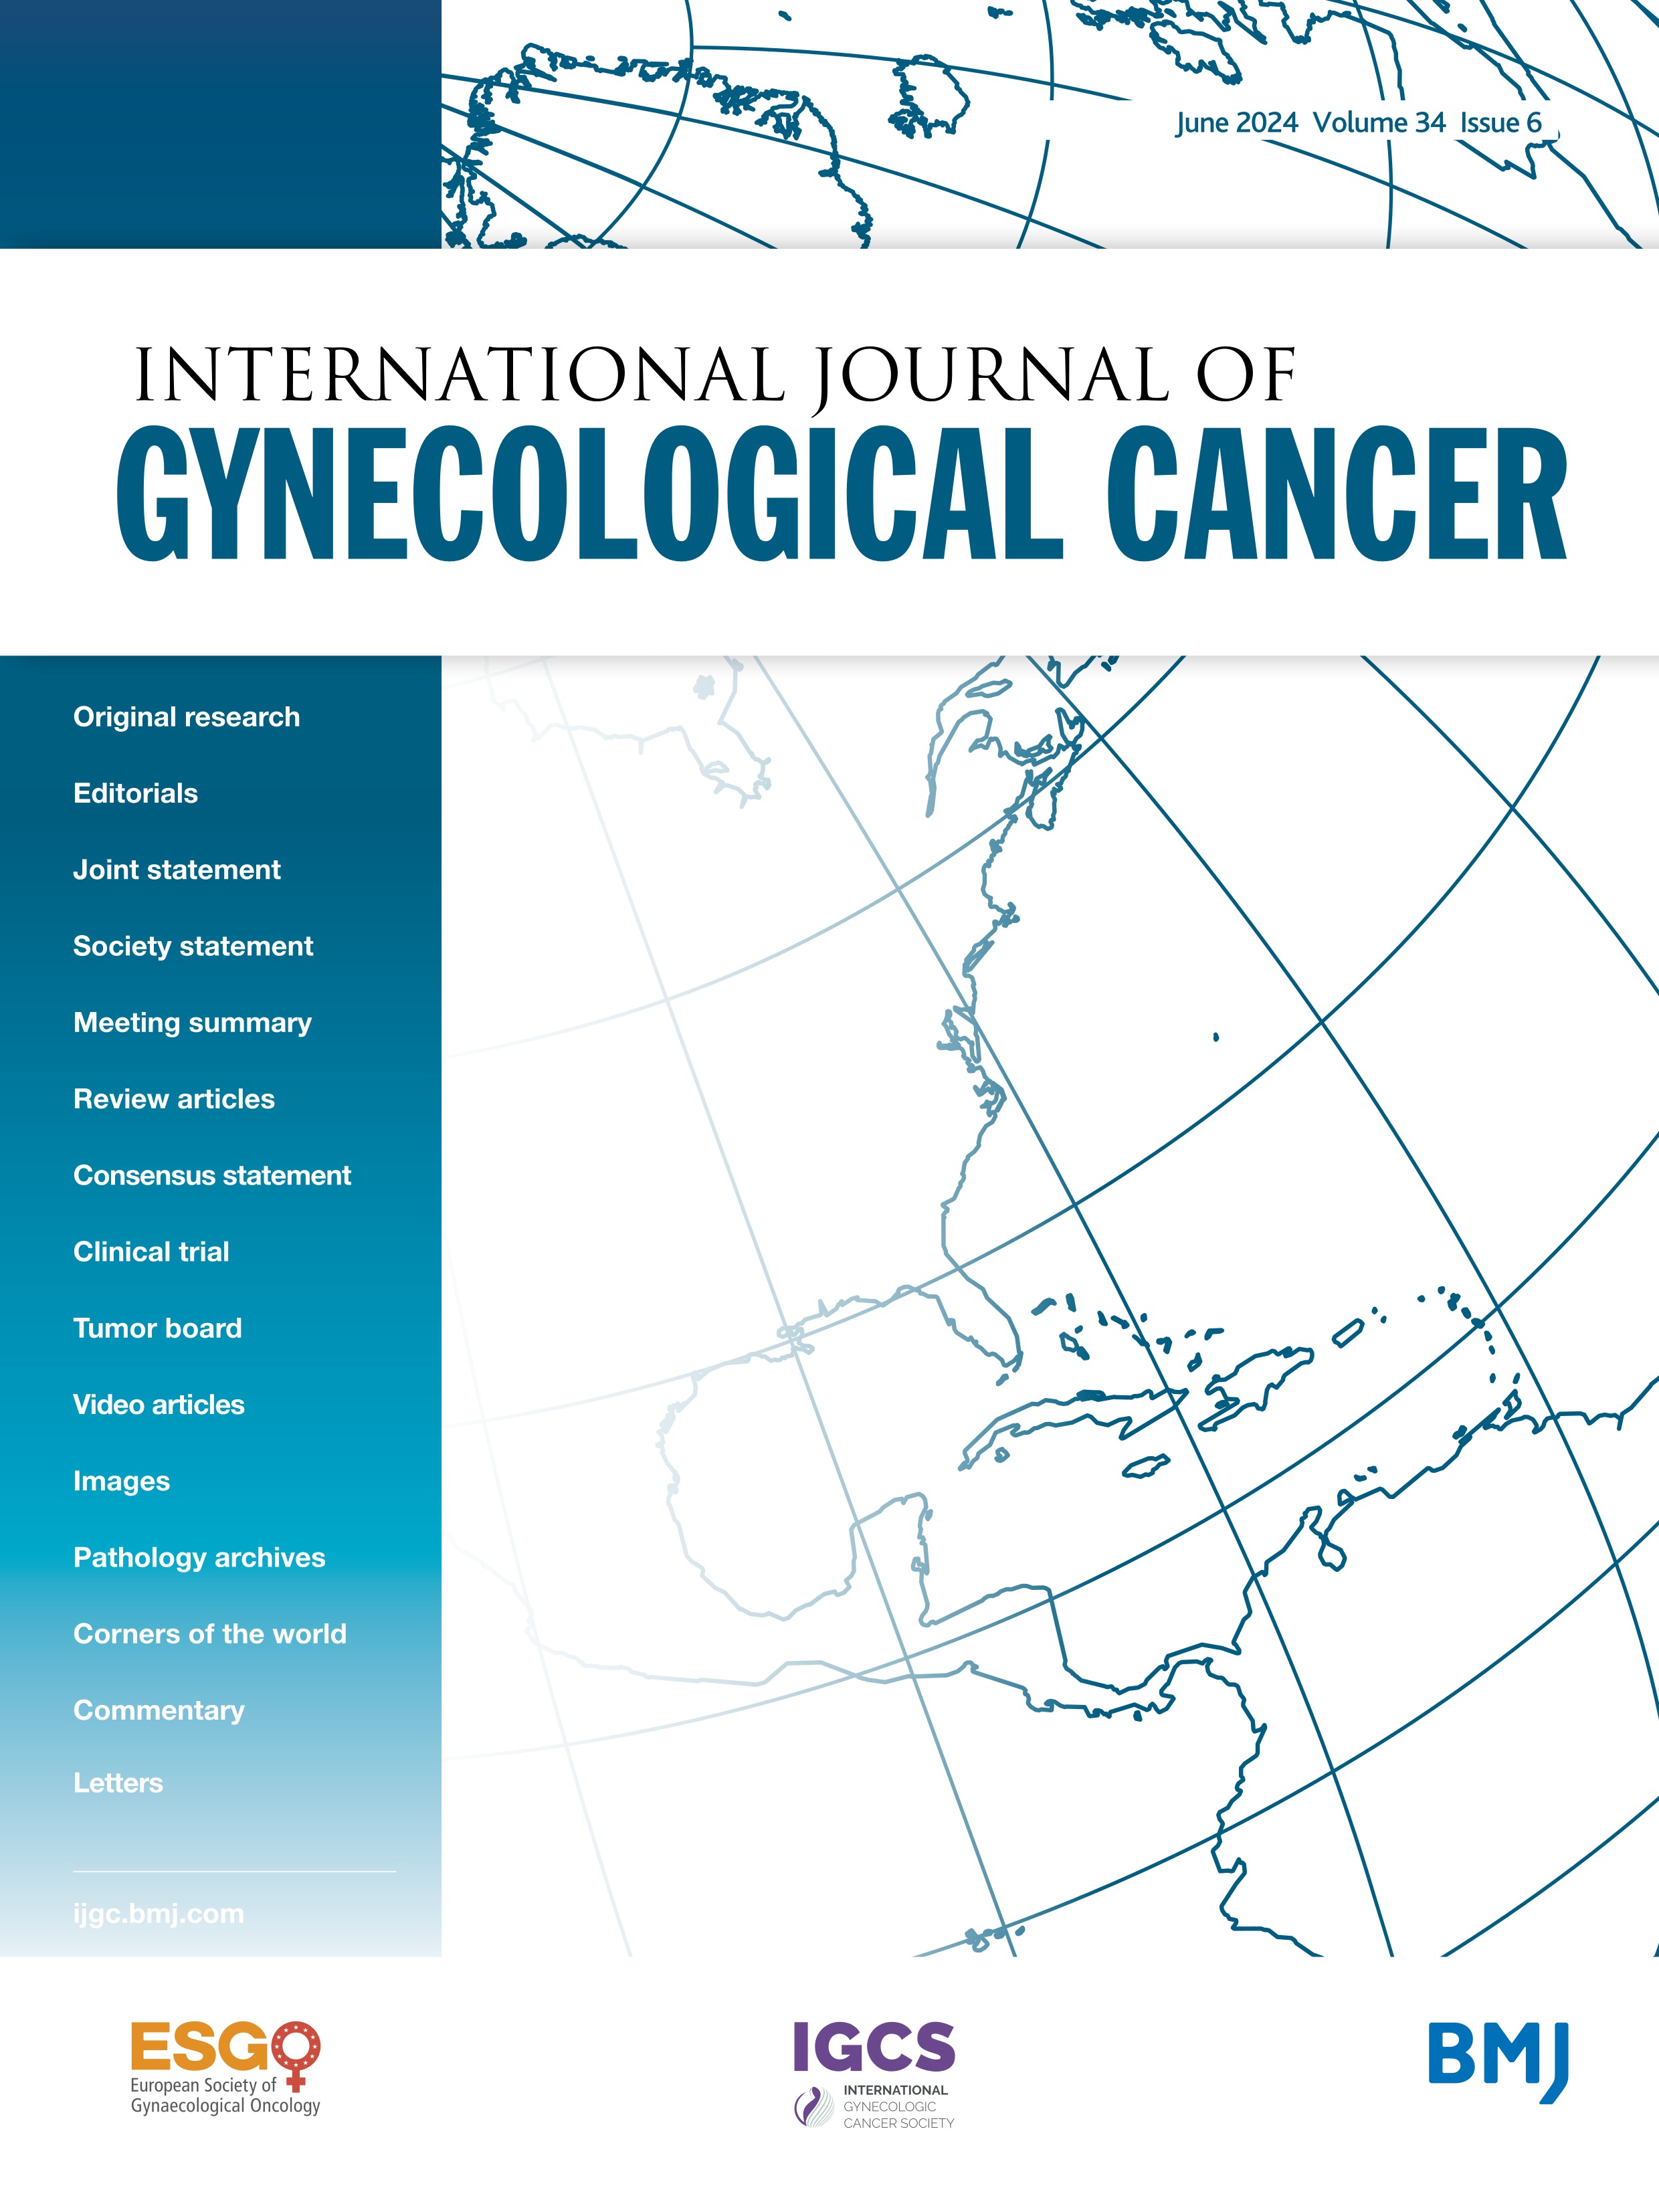 Patient satisfaction with ultrasound, whole-body CT and whole-body diffusion-weighted MRI for pre-operative ovarian cancer staging: a multicenter prospective cross-sectional survey